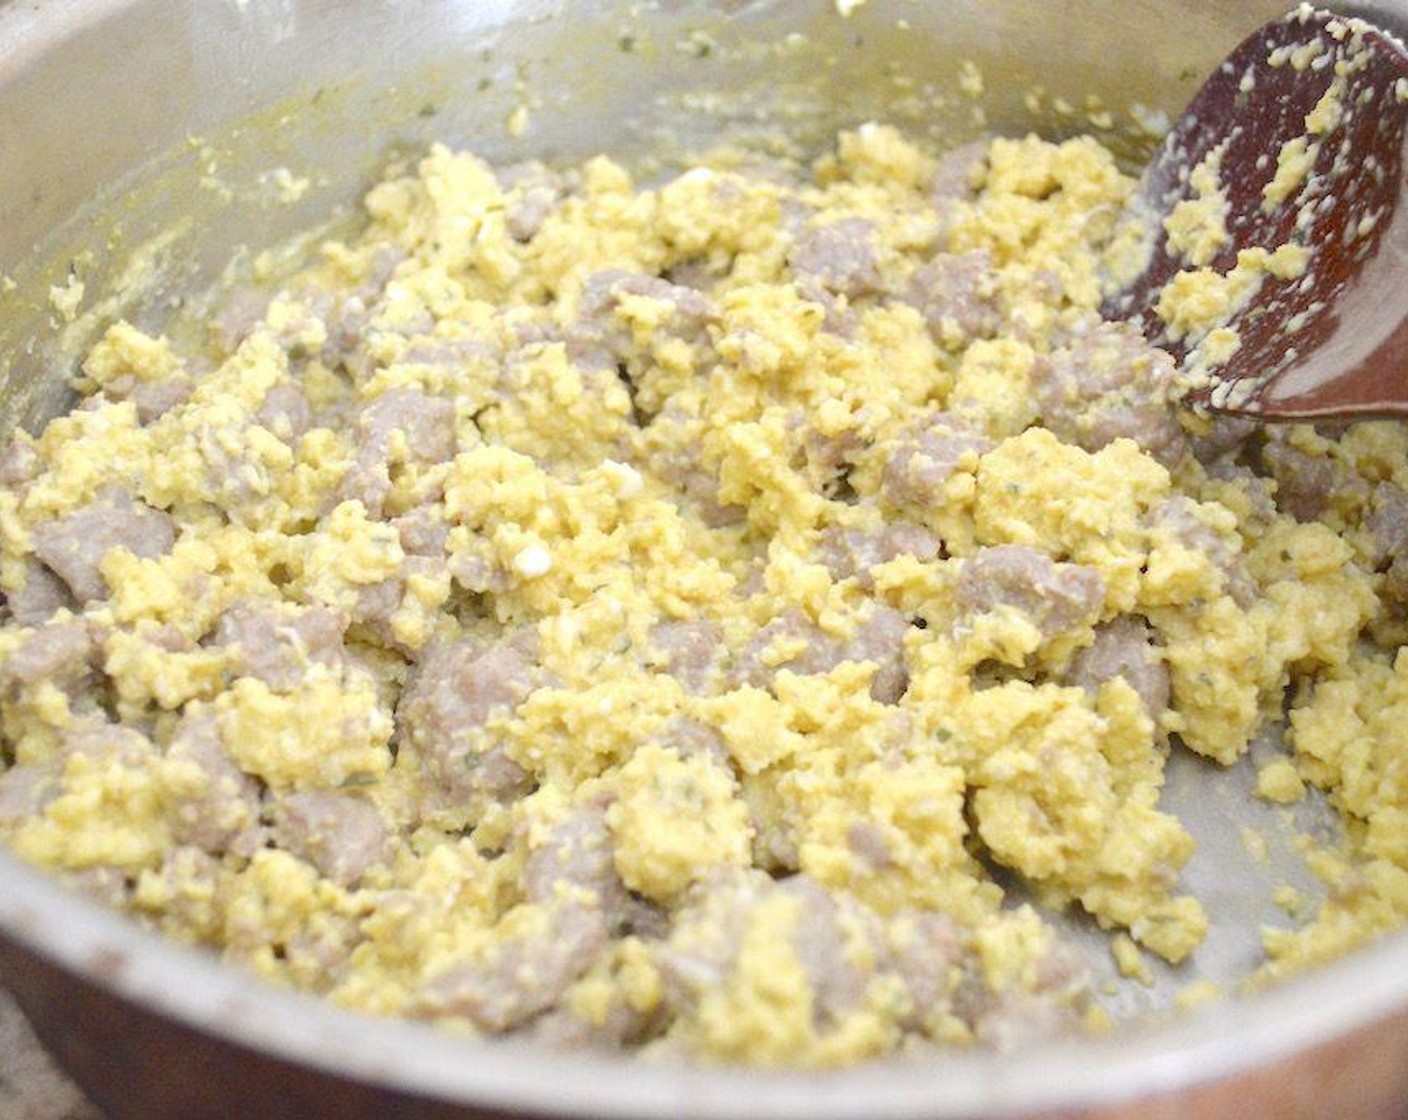 step 4 When the sausage is done, pour in the egg mixture over it and stir it pretty constantly until it is fully cooked into soft, fluffy, sausagey scrambled eggs. Take it off of the heat and stir in the Whipped Chive Cream Cheese (1 Tbsp) for added flavor and creamy texture.